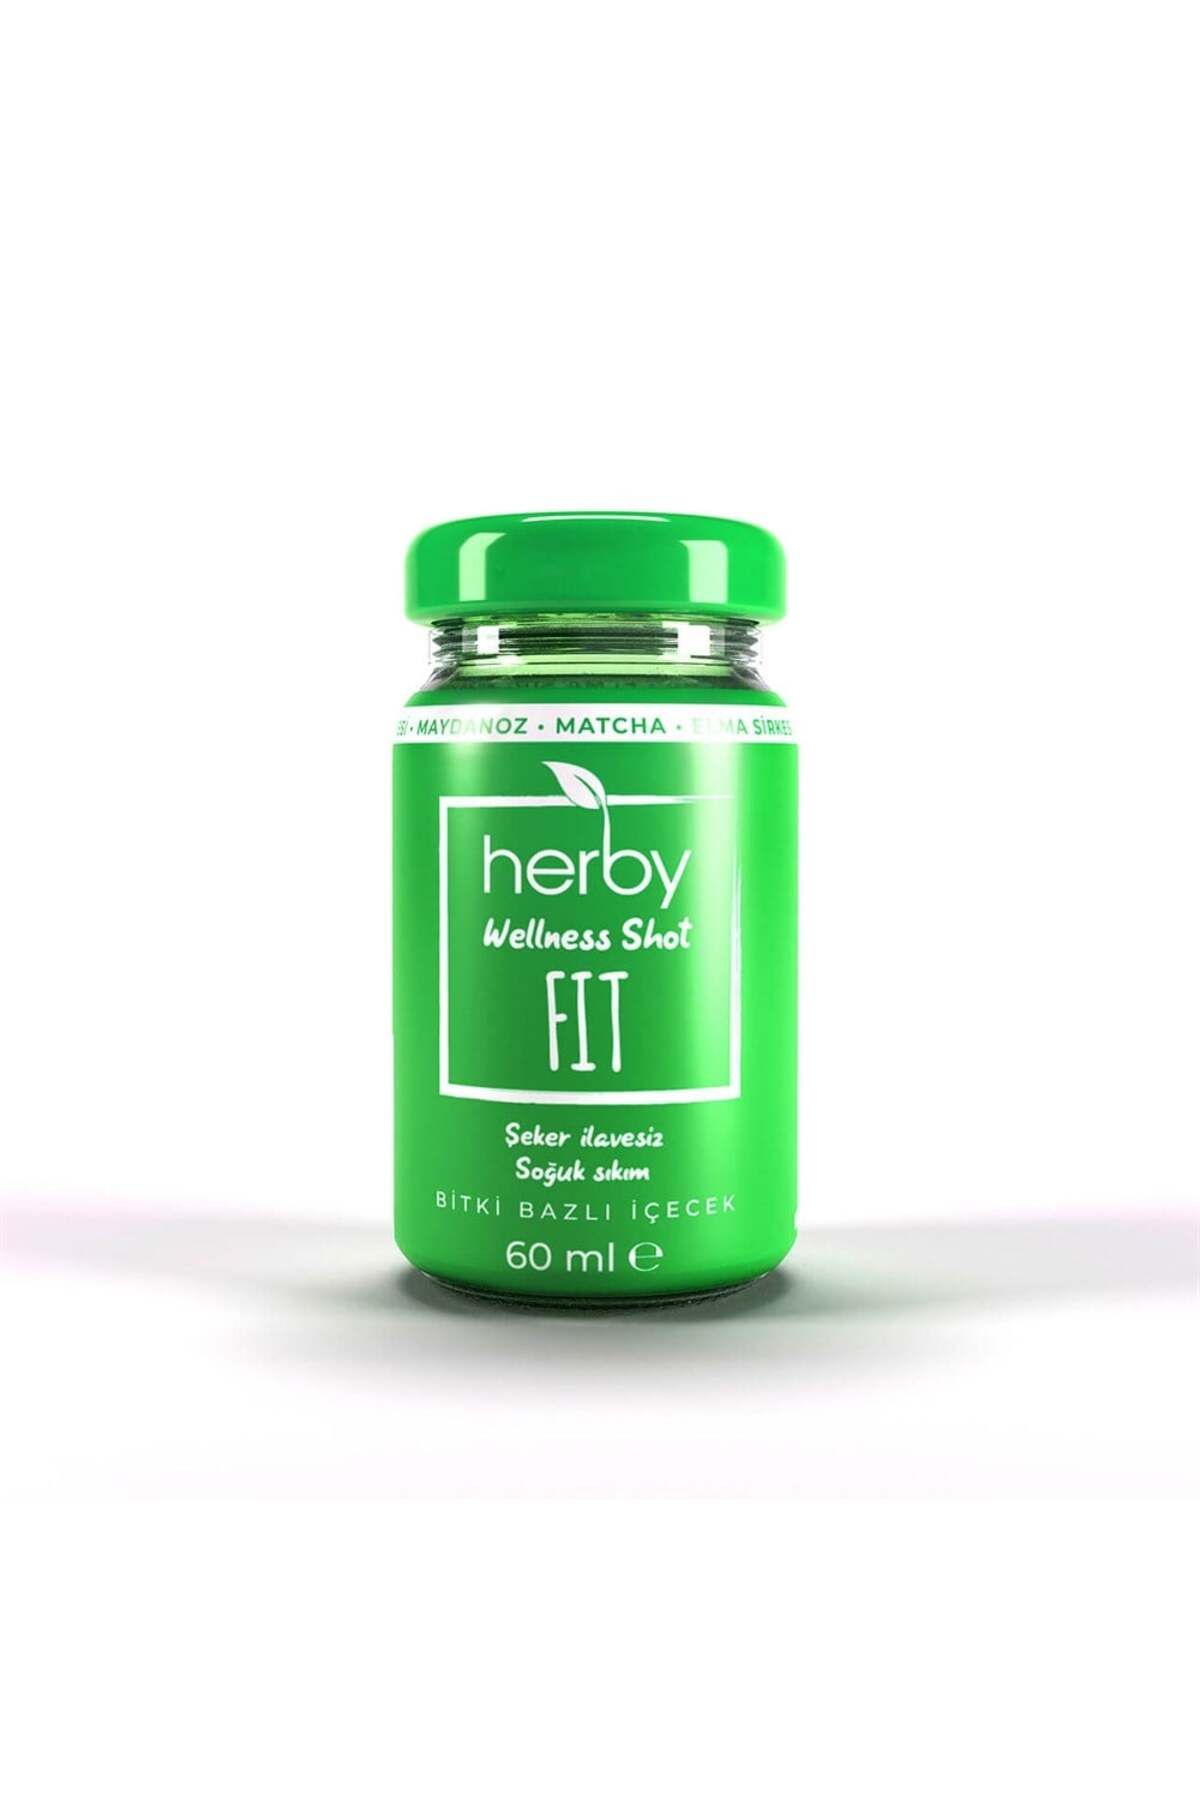 Herby Wellness Shot Fit 60ml